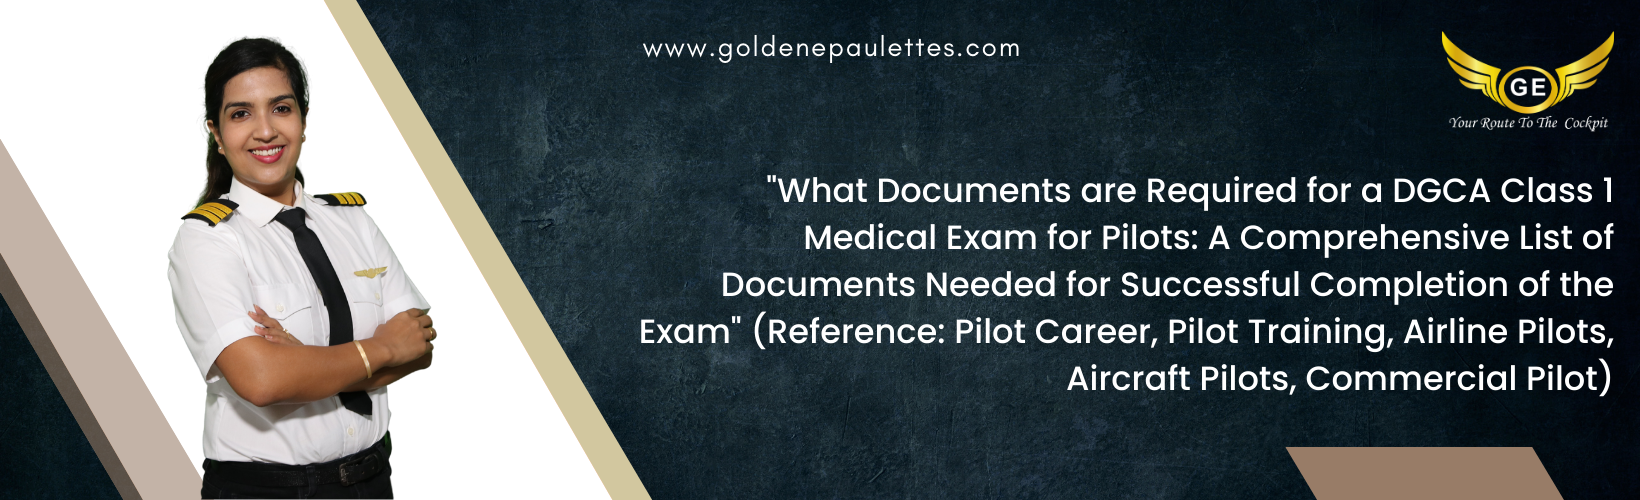 What Documents are Required for a DGCA Class 1 Medical Exam for Pilots